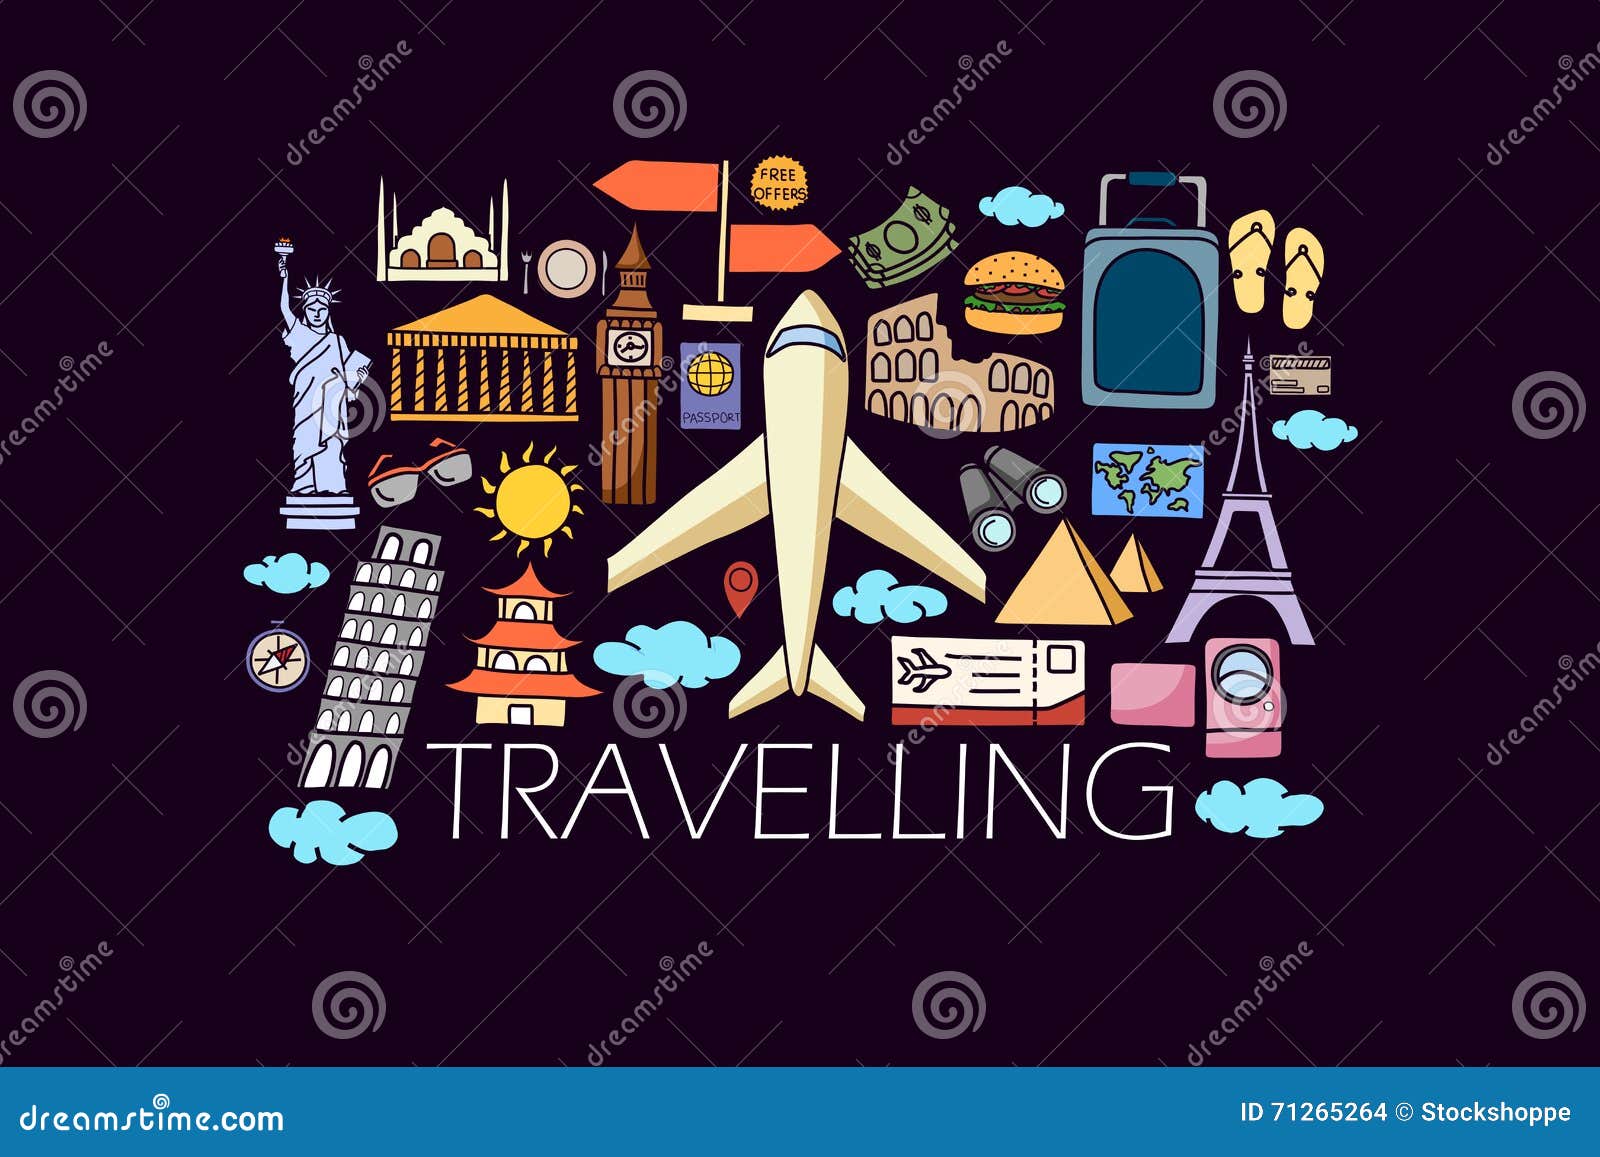 Travel Concept for Web Design Template Stock Vector - Illustration of ...